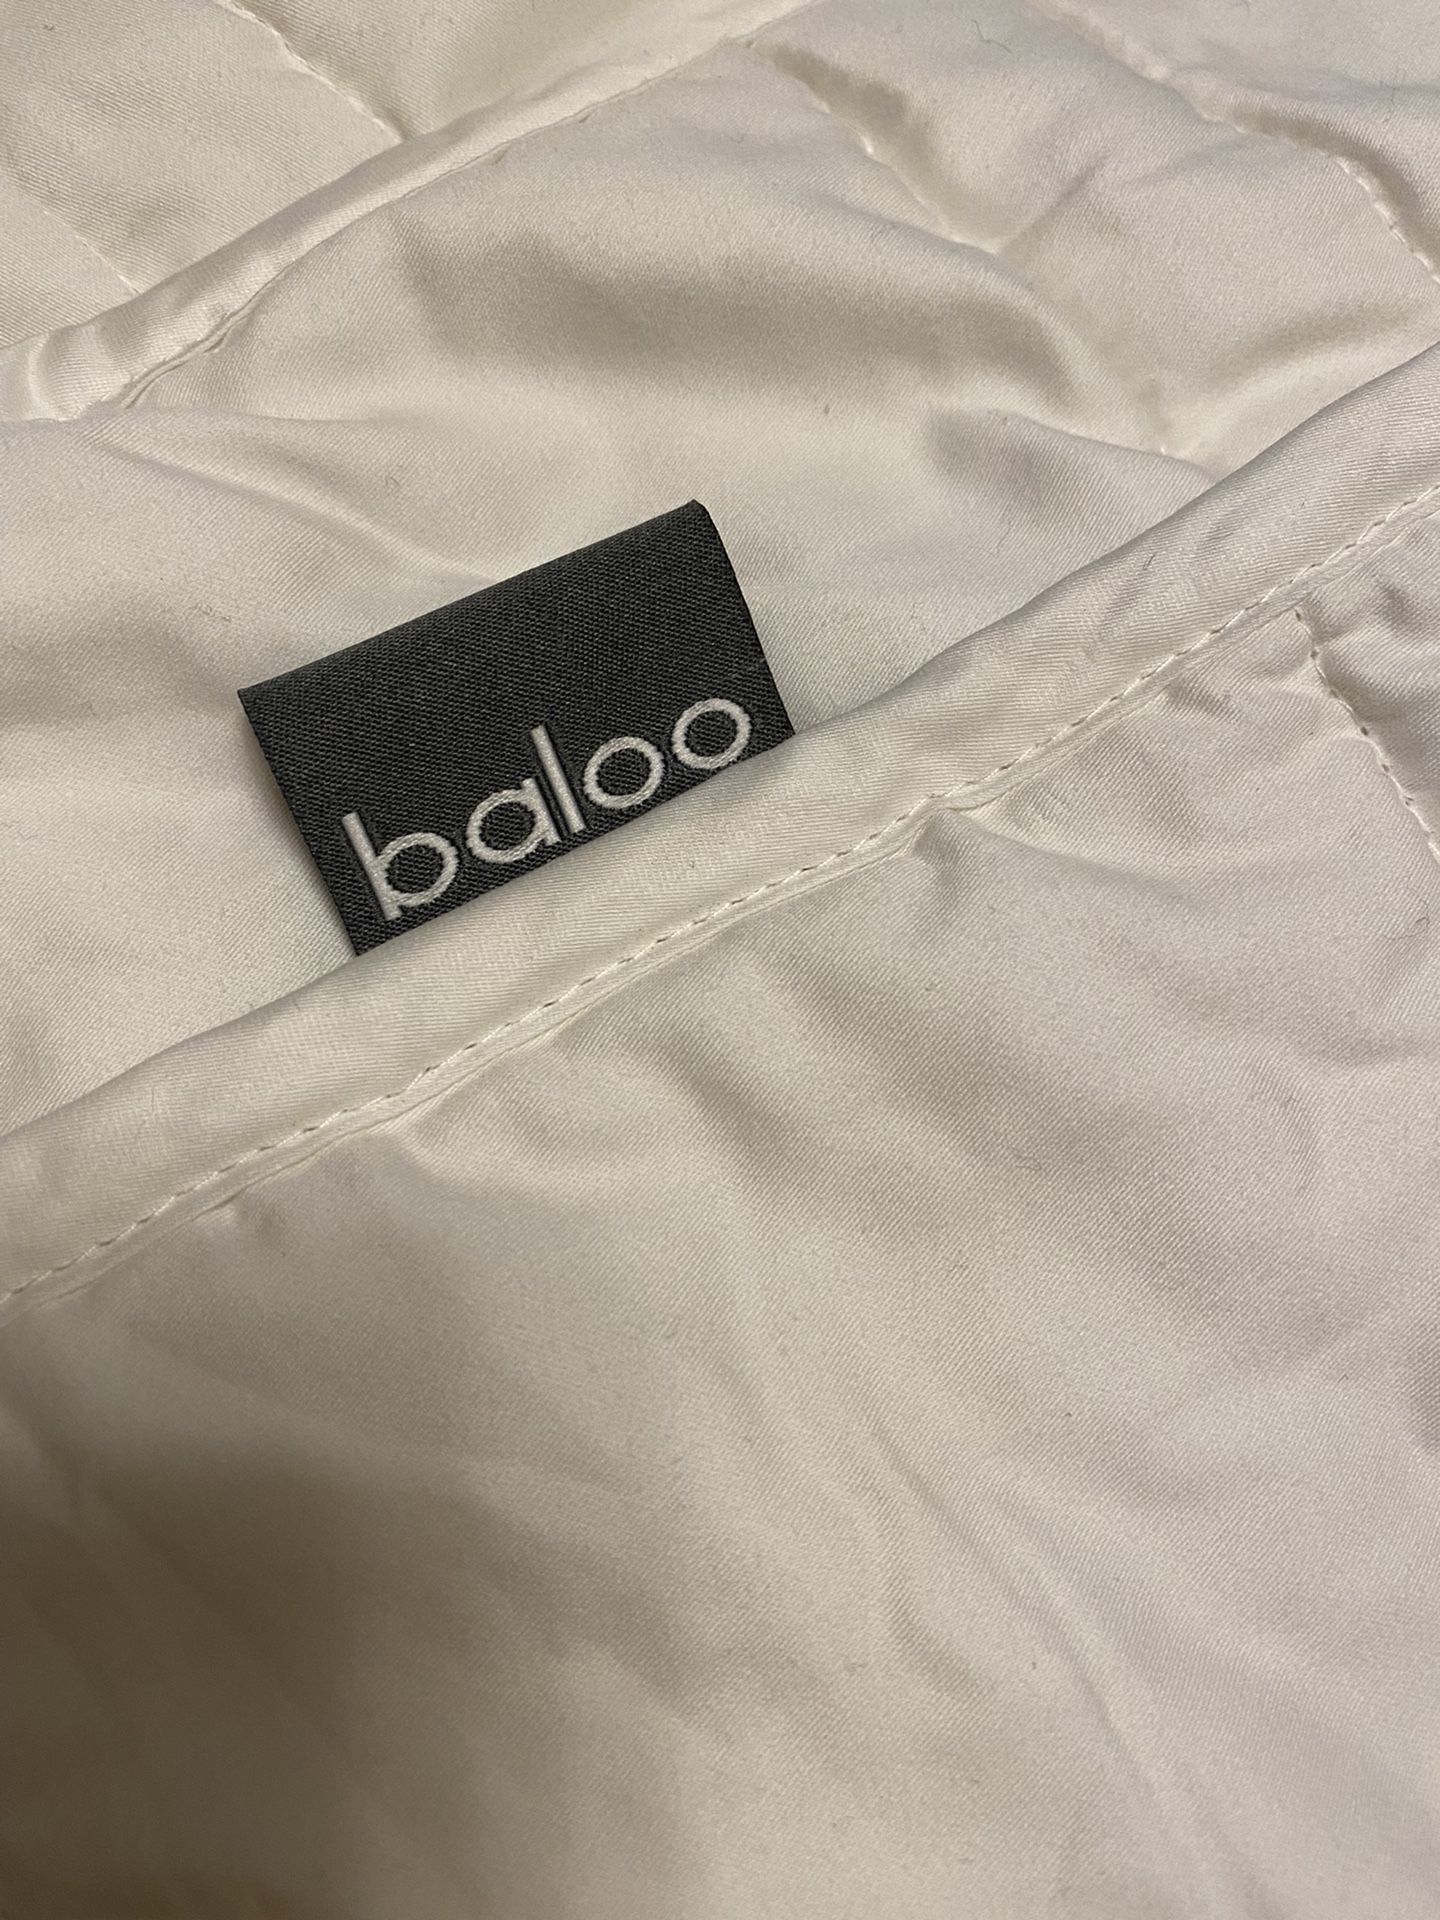 Baloo Weighted Blanket